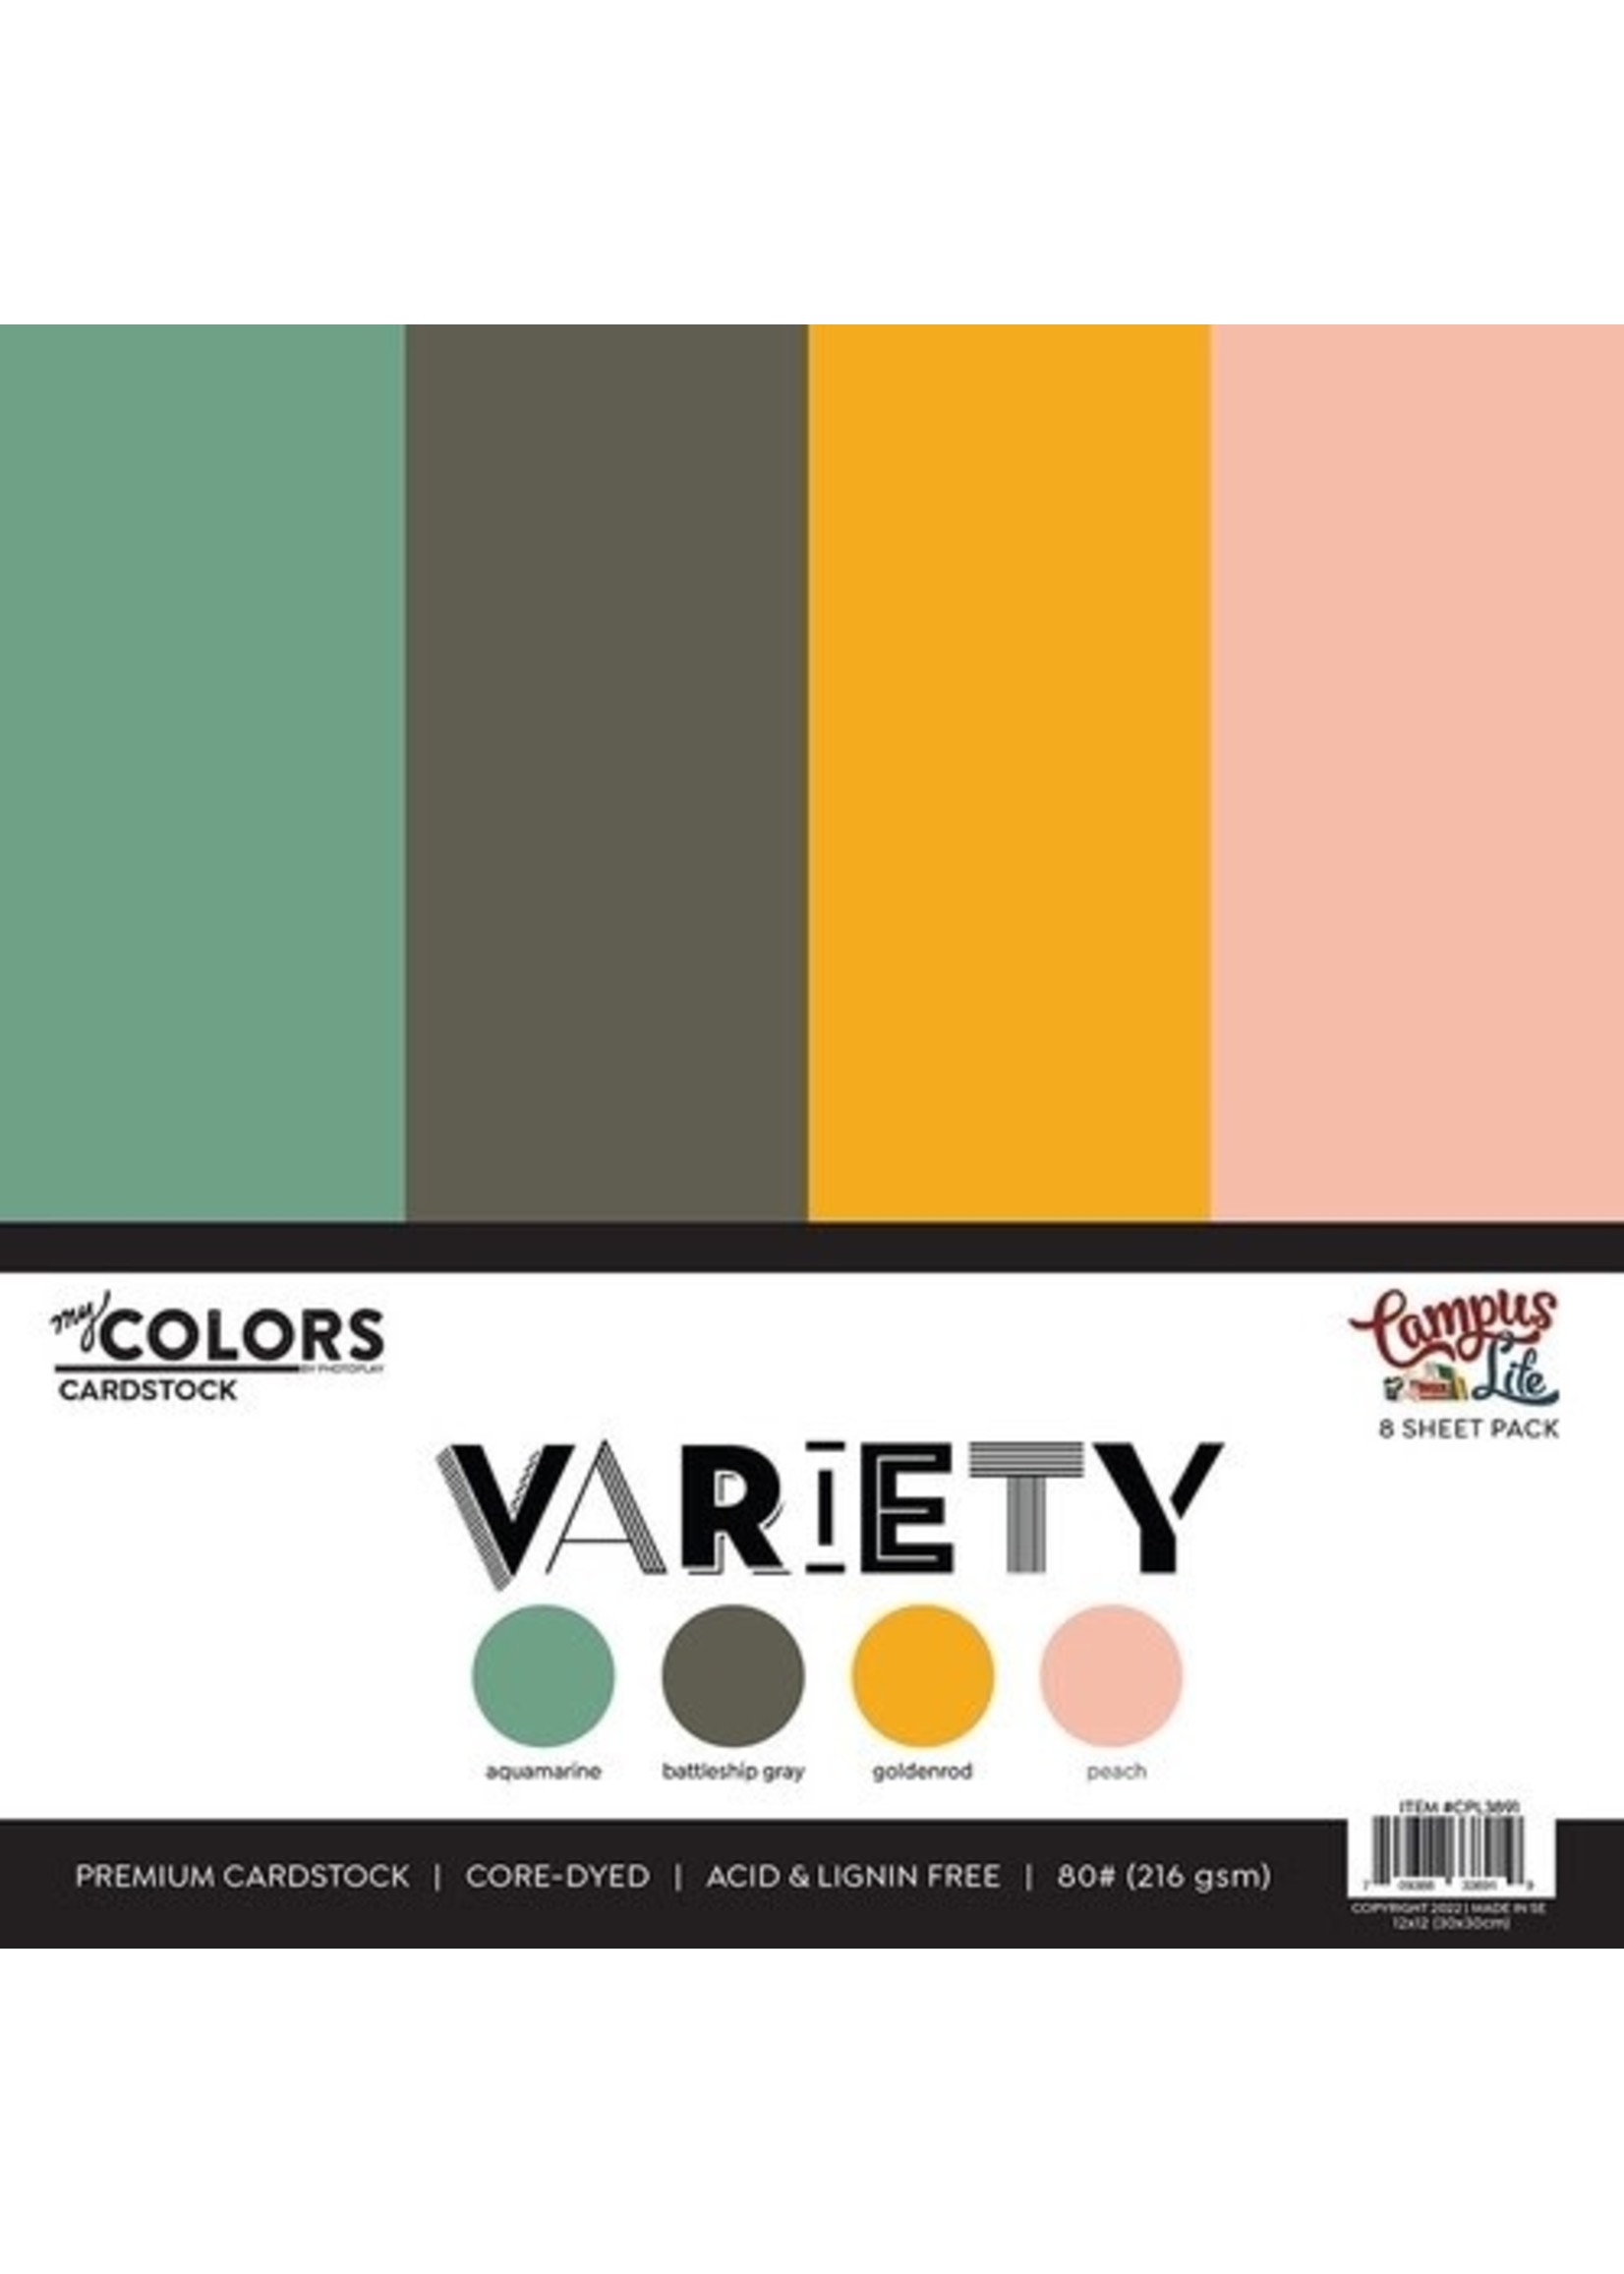 Photoplay Campus Life - Cardstock Variety Pack - 8 sheets